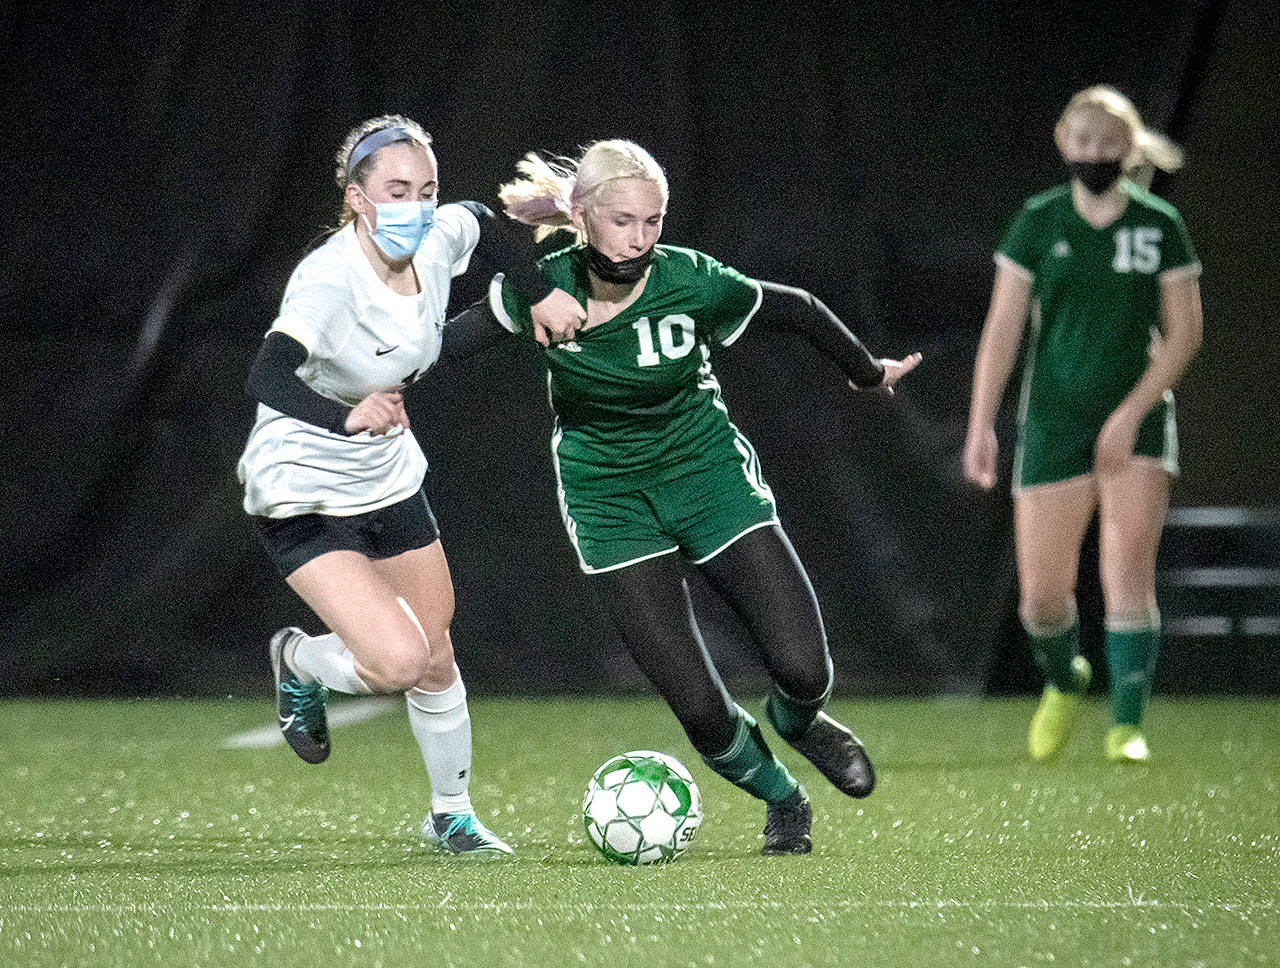 Jesse Major/for Peninsula Daily News Port Angeles’ Millie Long (10) had two goals for the Roughriders Tuesday night against Klahowya in a 3-1 win over a strong team. In the background is the Riders’ Paige Mason (15).